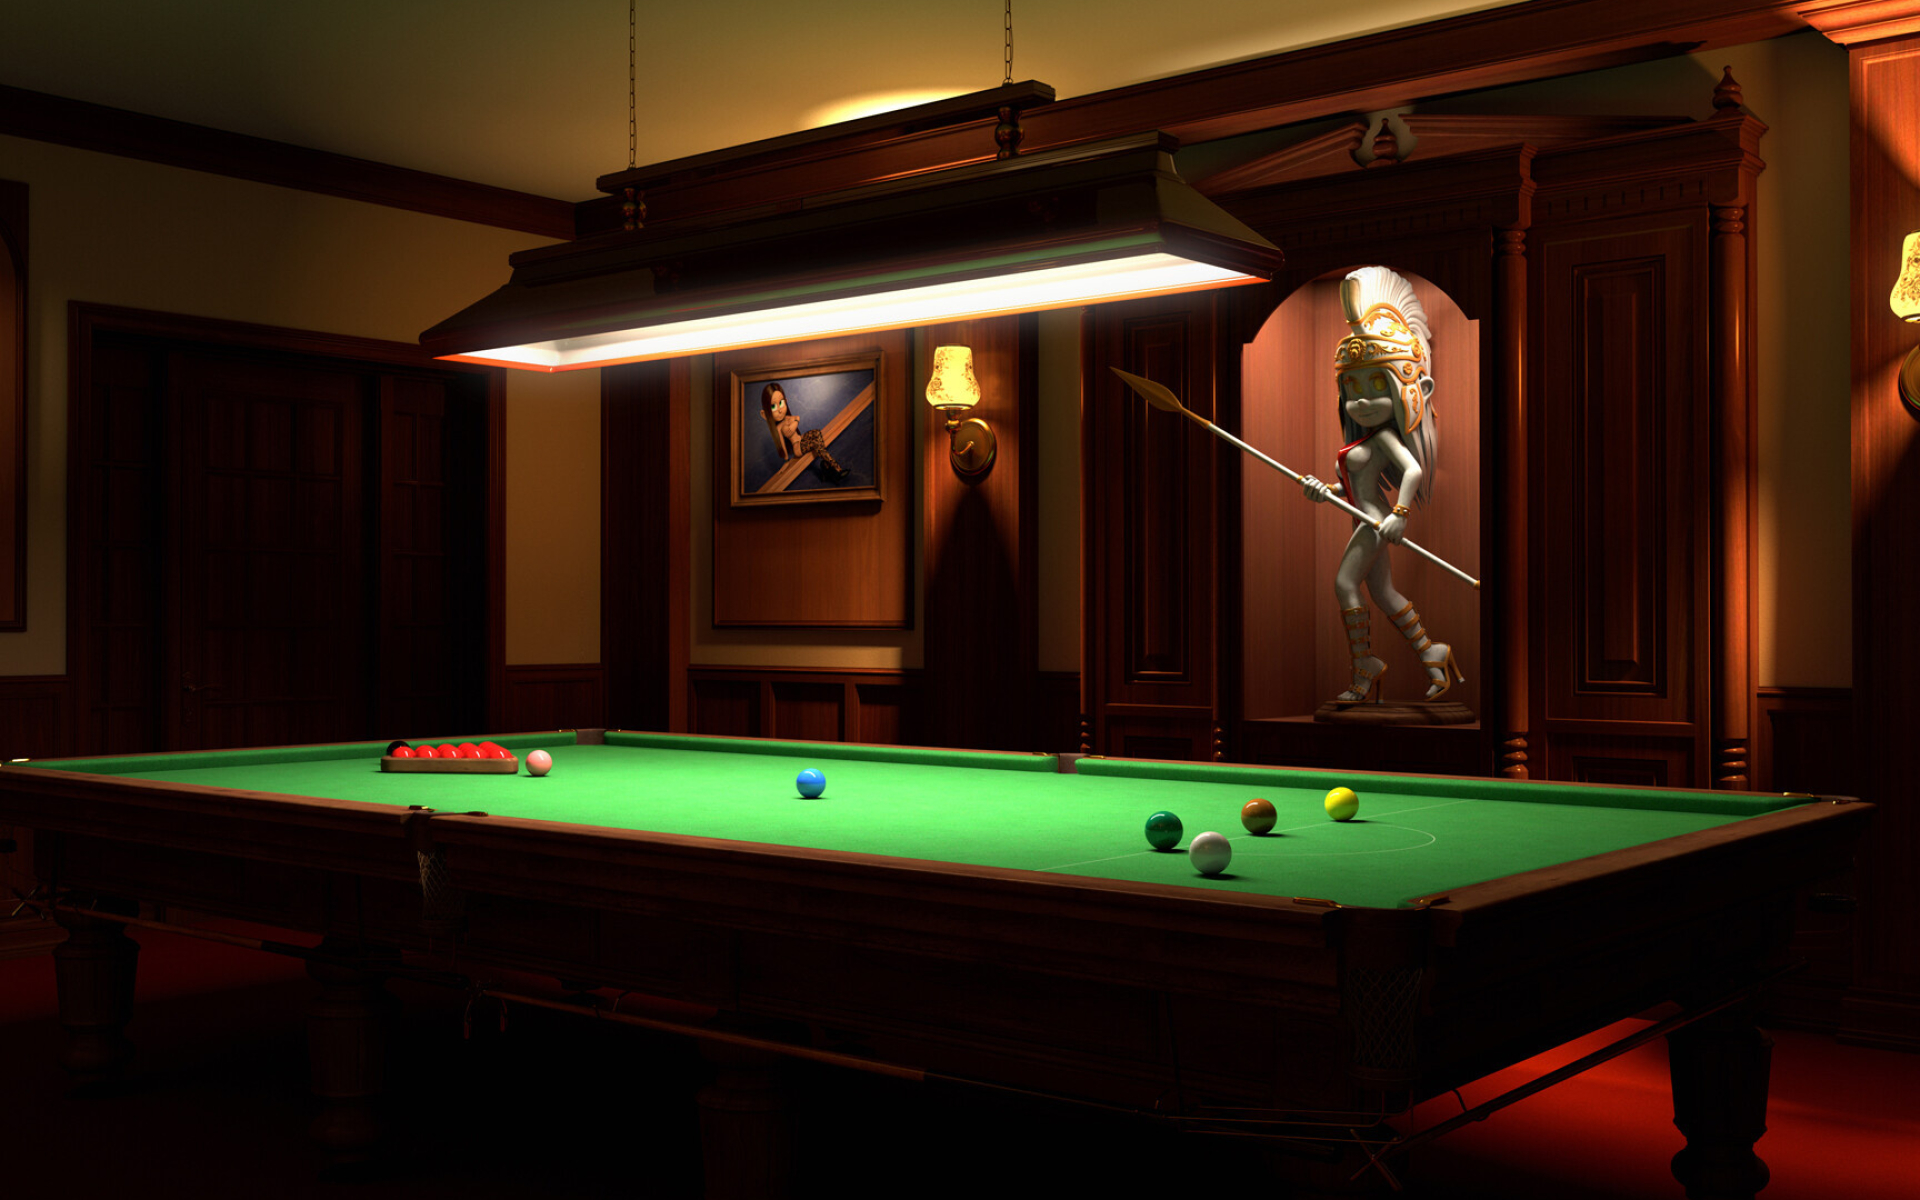 Peter Bond's snooker room, Passion for the sport, Personal playing space, Snooker haven, 1920x1200 HD Desktop